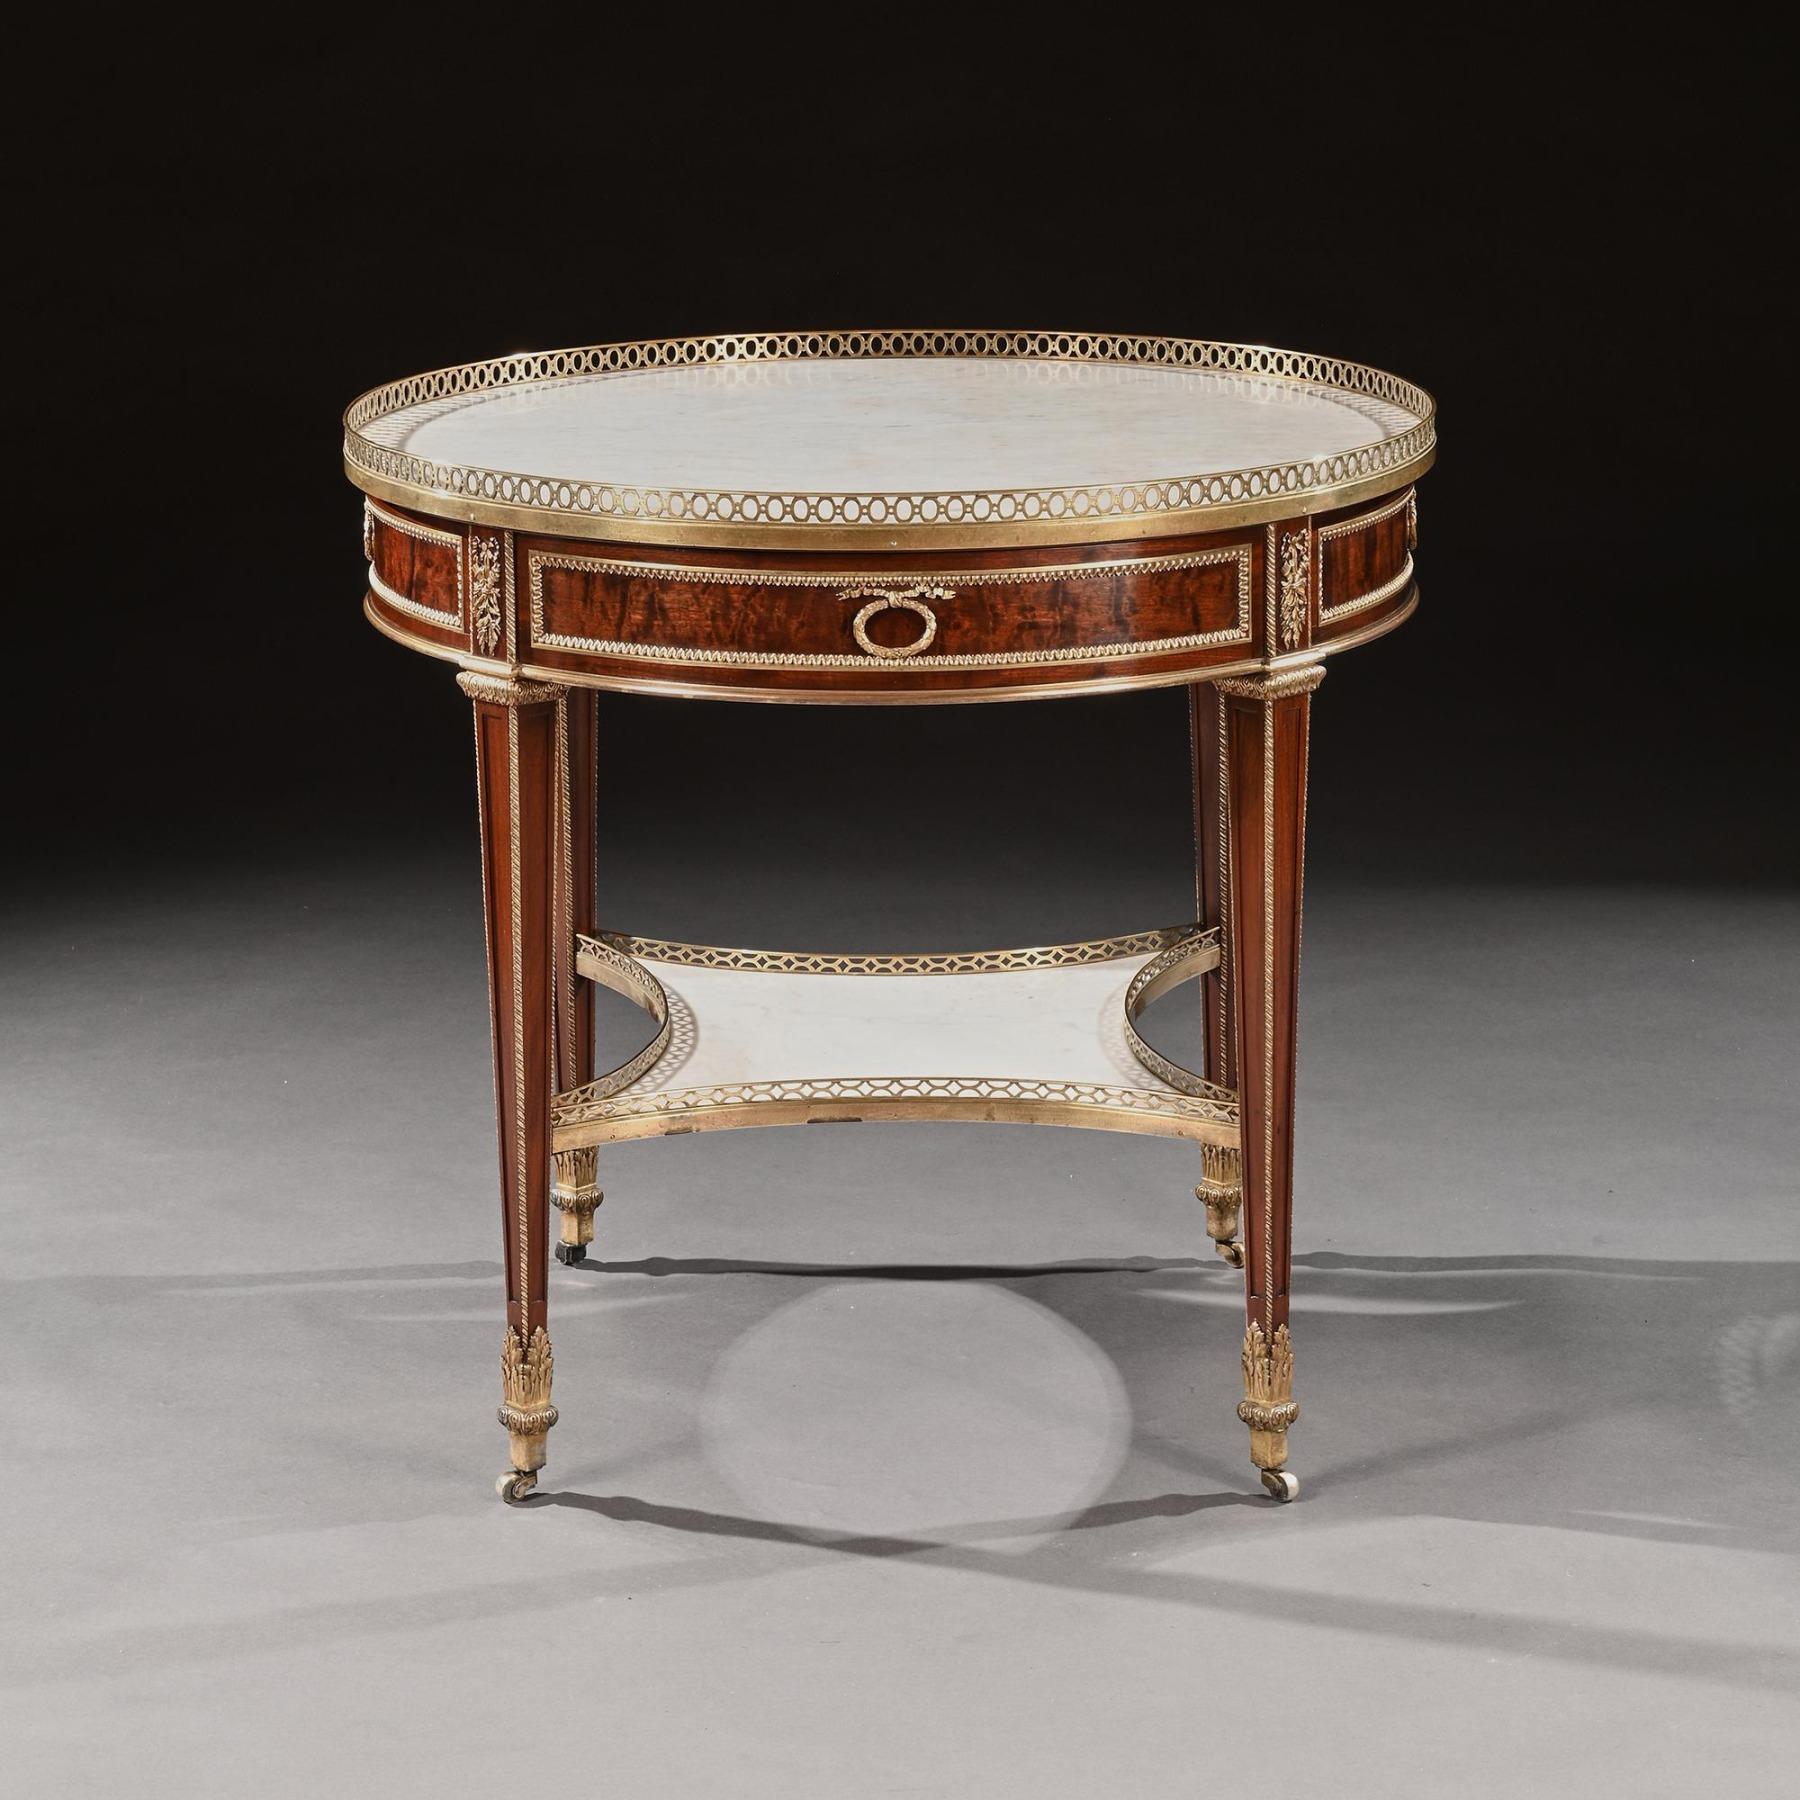 Exceptional G. Durand 19th C. Mahogany & Gilt Bronze Gueridon Bouillotte Table 1